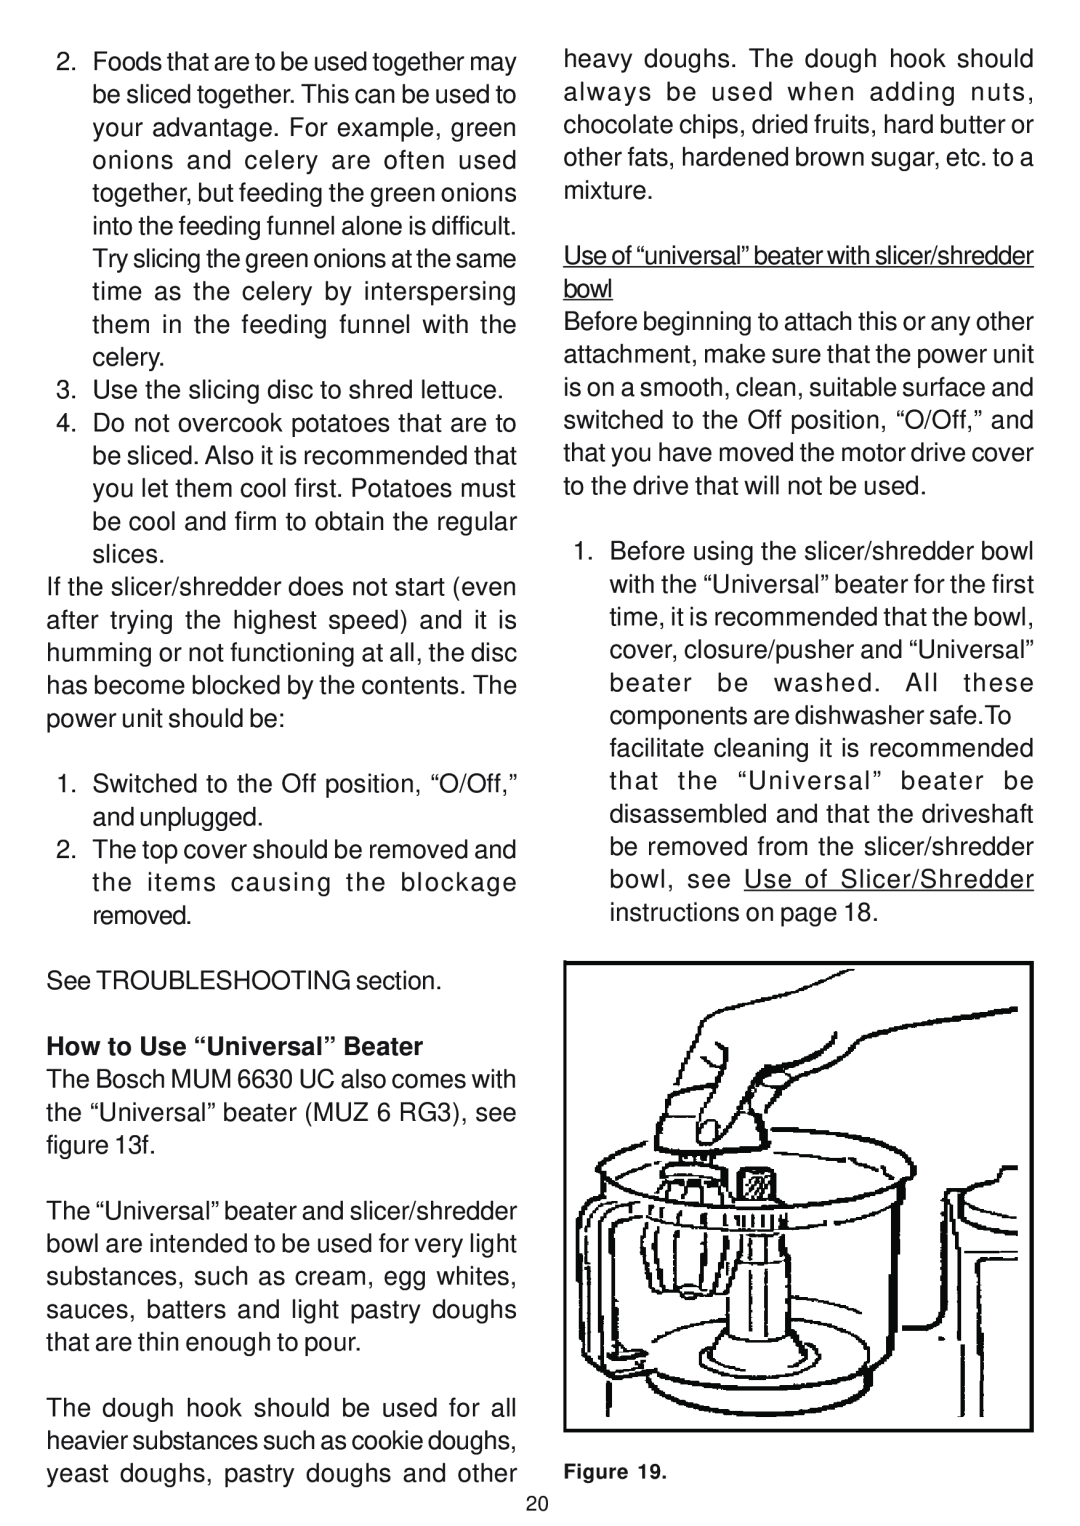 Bosch Appliances MUM 6610 UC owner manual How to Use “Universal” Beater 